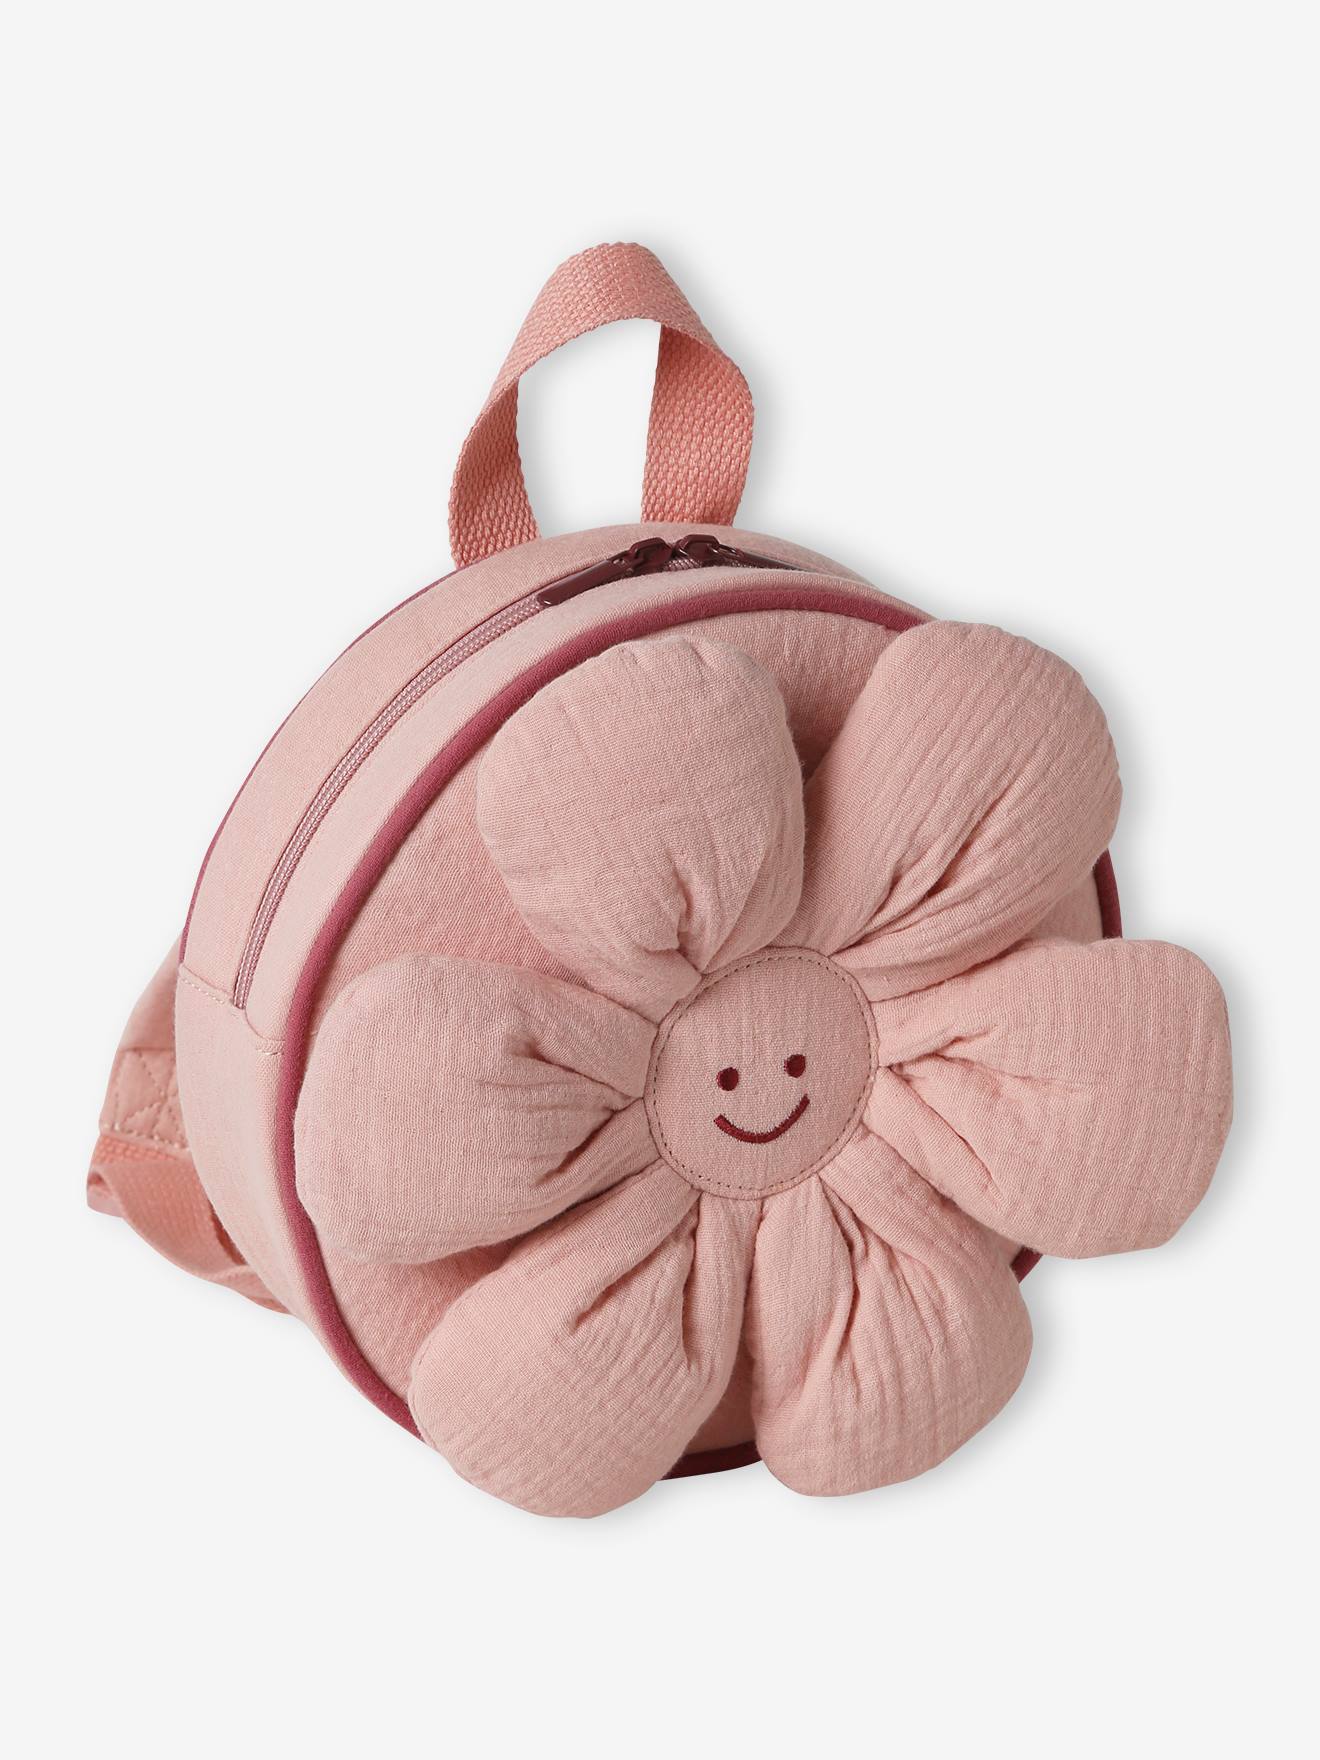 Flower Backpack in Cotton Gauze, Playschool Special, for